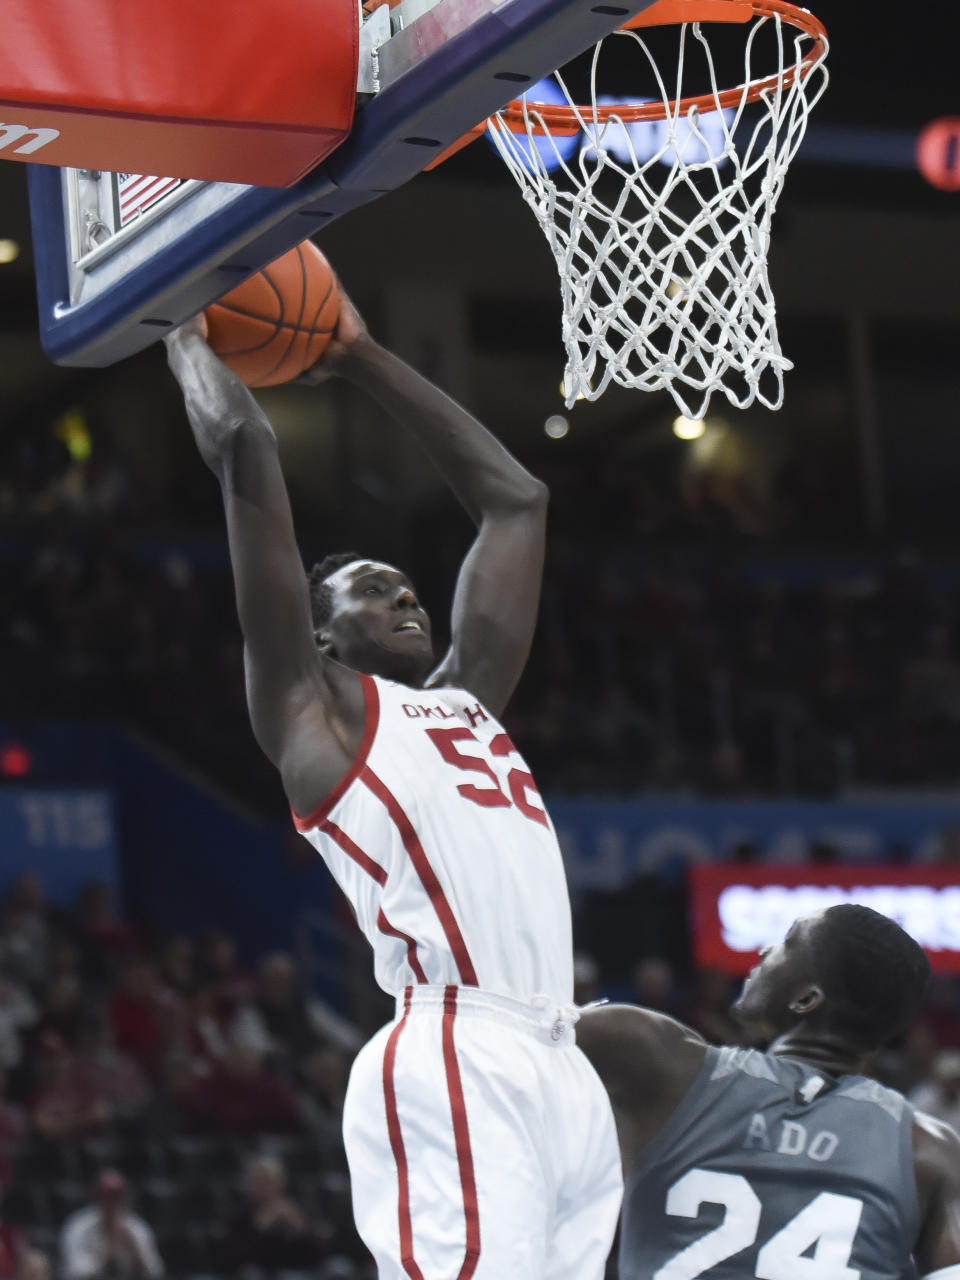 Oklahoma forward Kur Kuath (52) goes up for a shot over Mississippi State forward Abdul Ado (24) during the first half of an NCAA college basketball game in Oklahoma City, Saturday, Jan. 25, 2020. (AP Photo/Kyle Phillips)